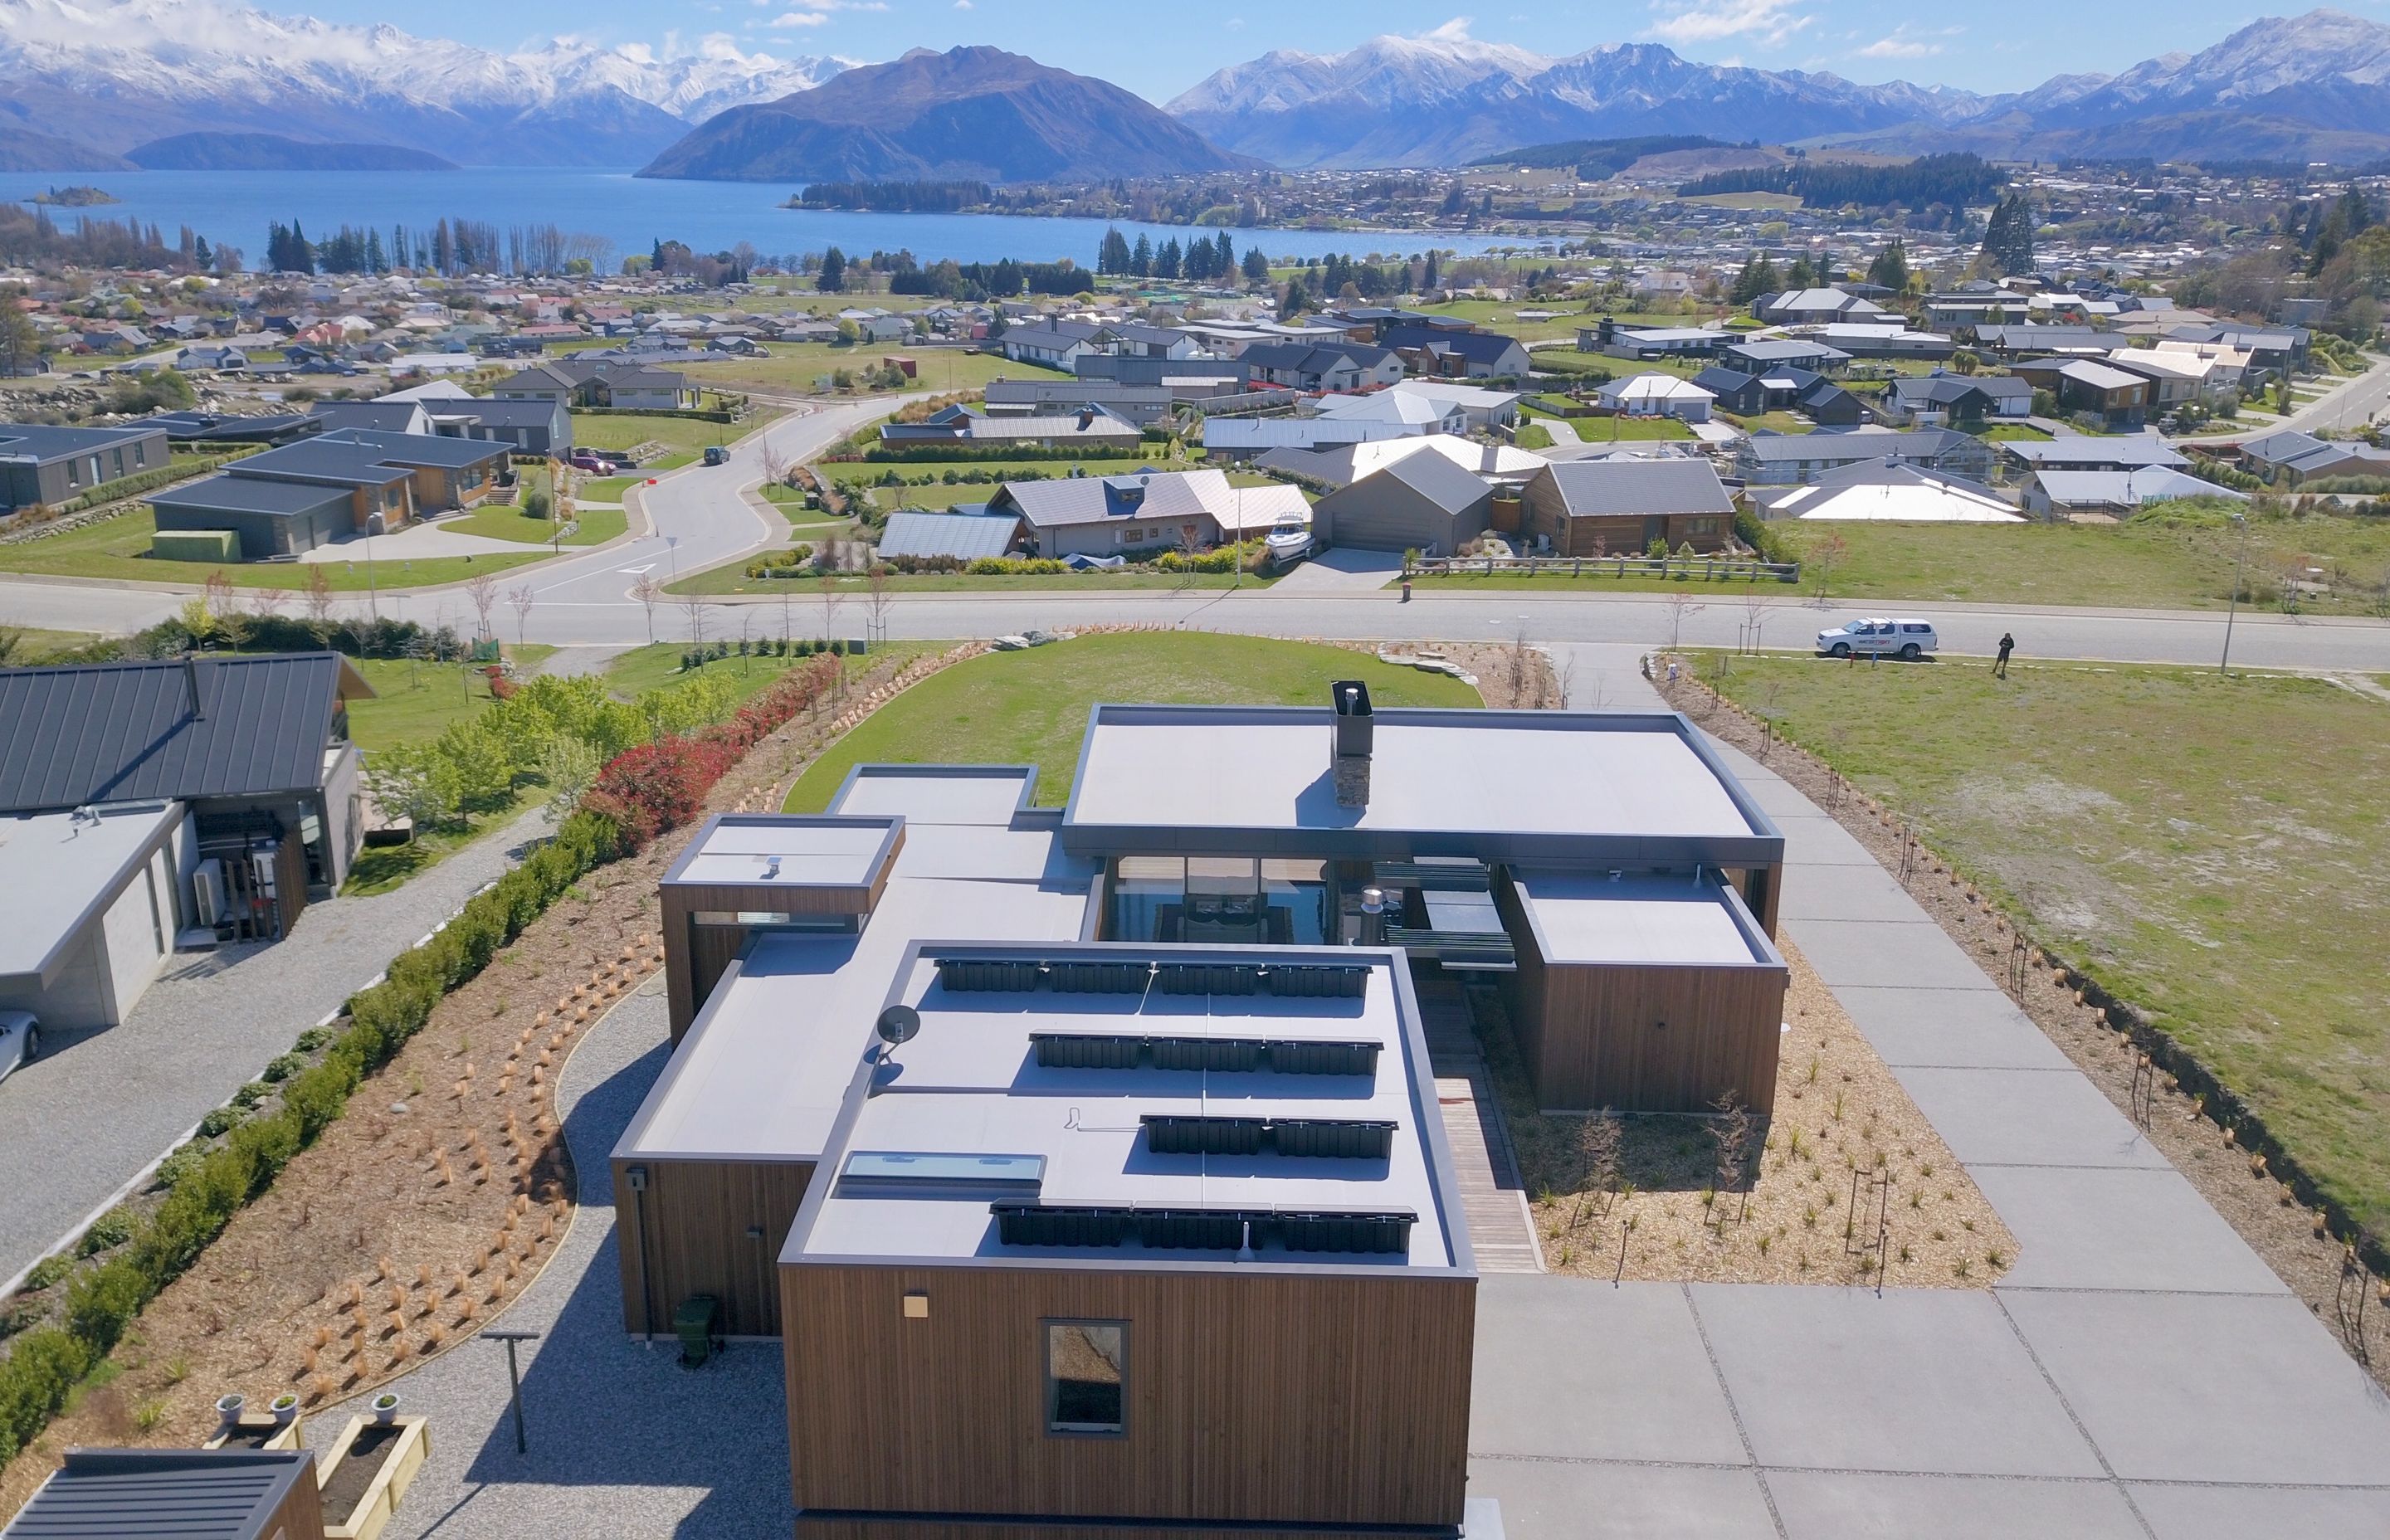 With its lightweight structure and high R-Value rating, WarmSpan is ideal for use in areas that experience high temperature fluctuations, such as Queenstown.